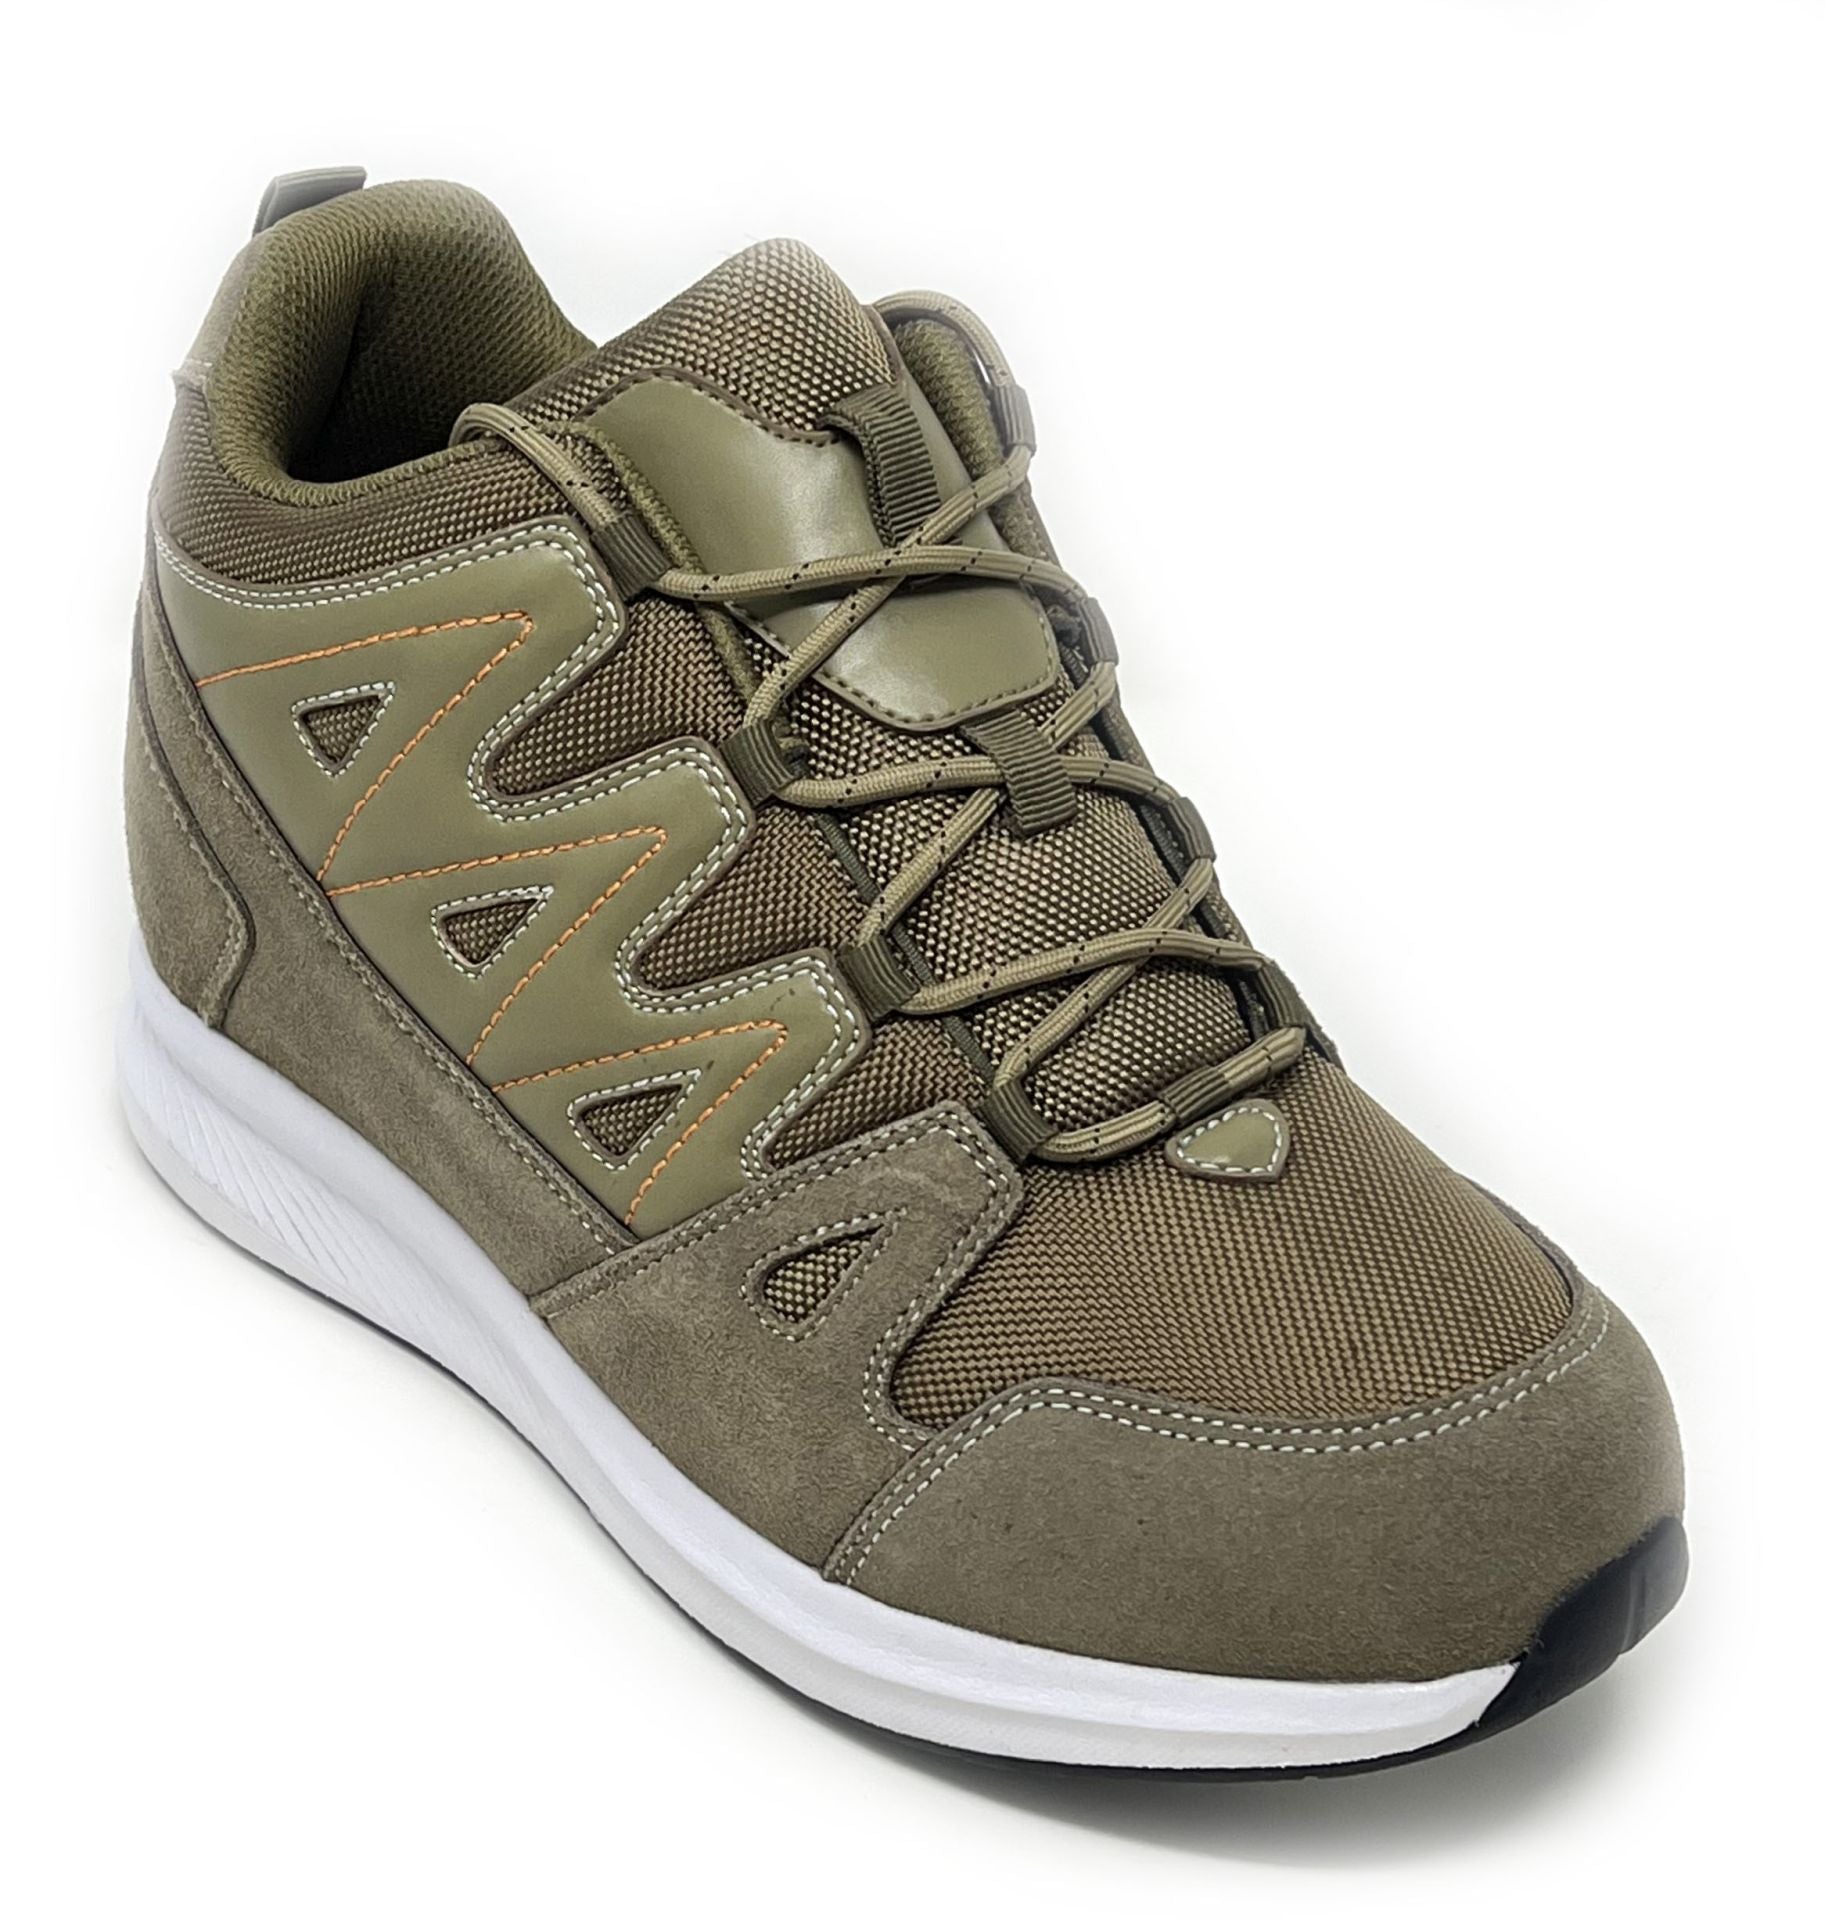 Elevator shoes height increase FSA0084 - 3.2 Inches Taller (Khaki) - Size 9 Only